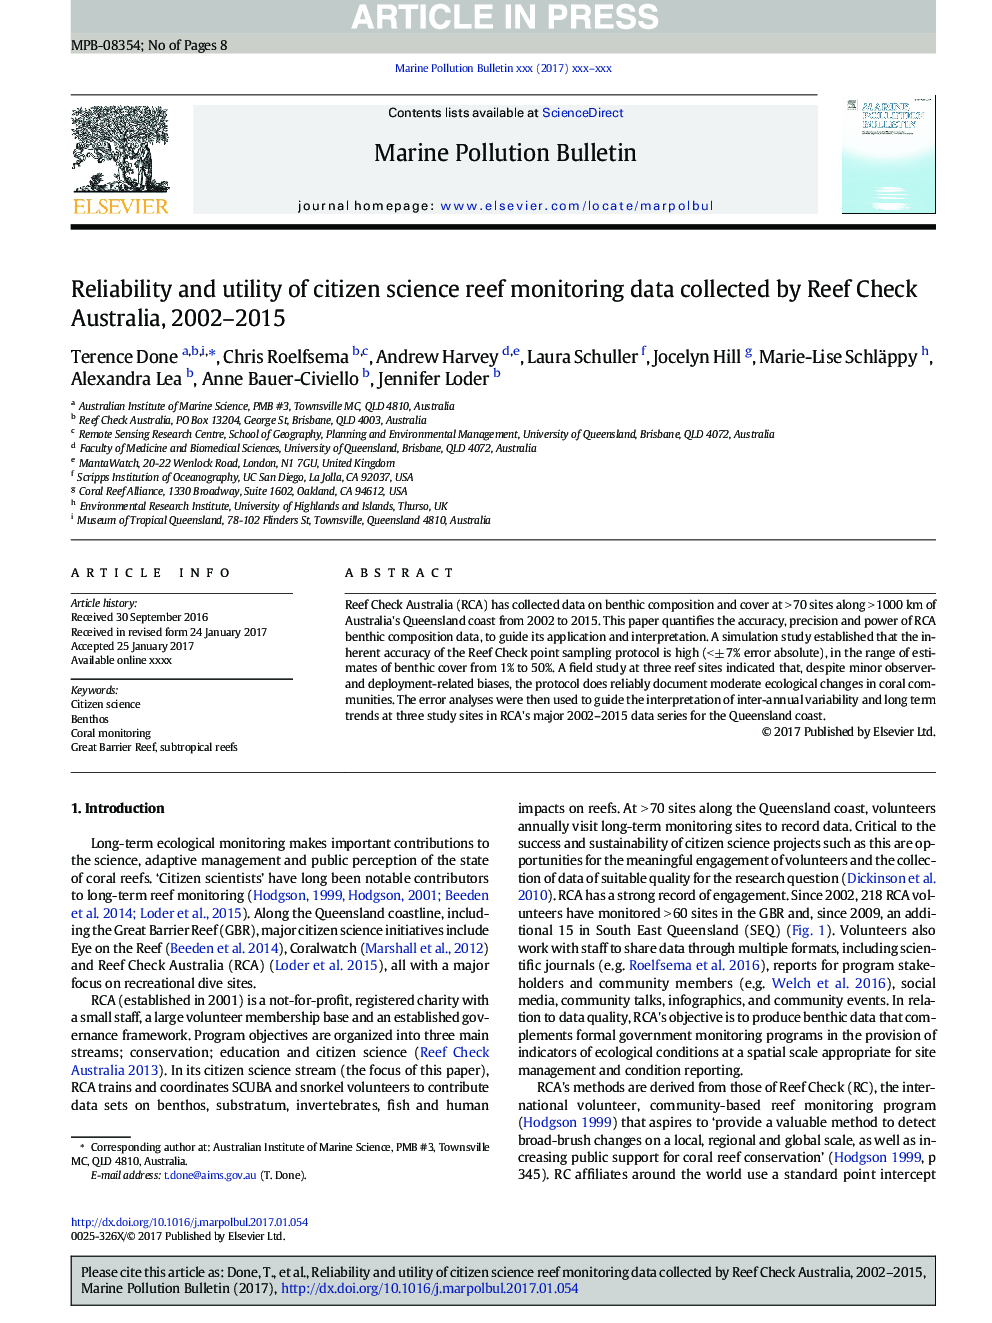 Reliability and utility of citizen science reef monitoring data collected by Reef Check Australia, 2002-2015